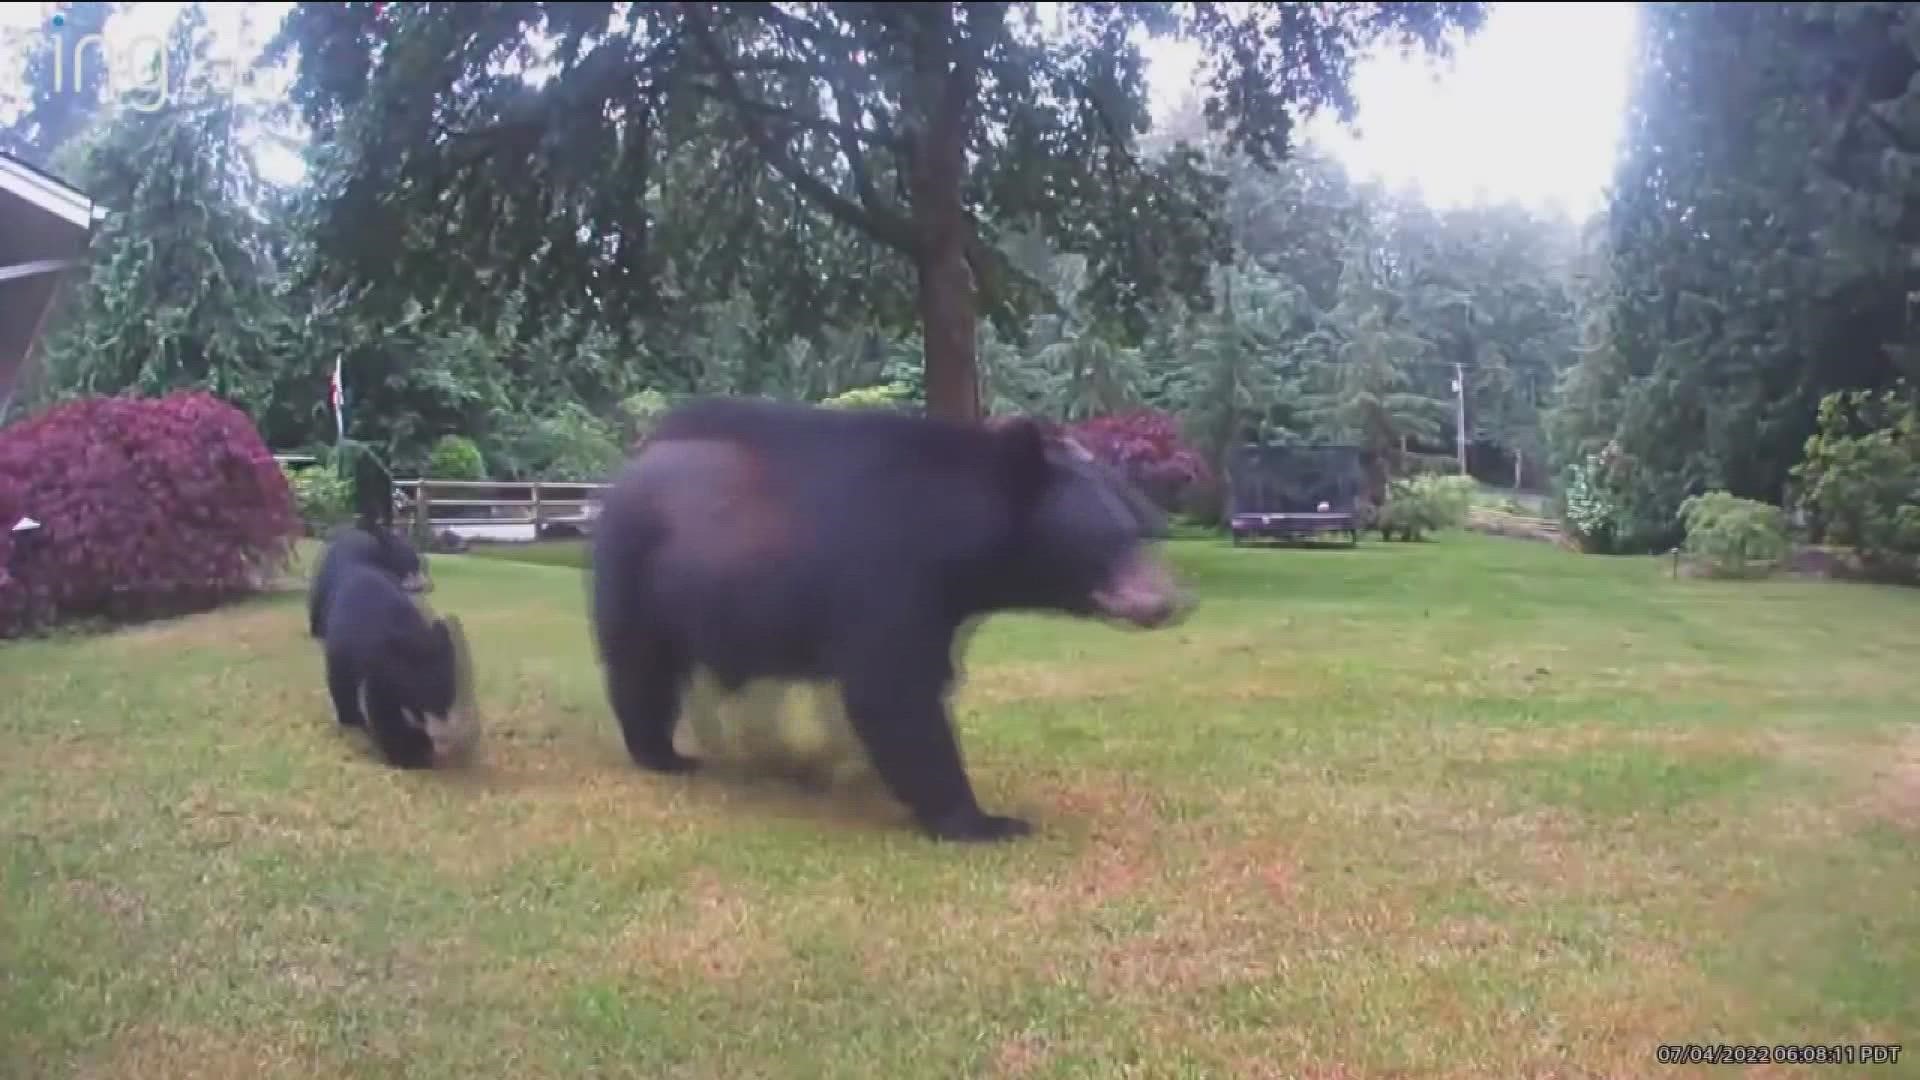 A Washington home's doorbell cam shows a mama black bear and two cubs ambling into the backyard. In Idaho, food-conditioned bears were getting into campsites.